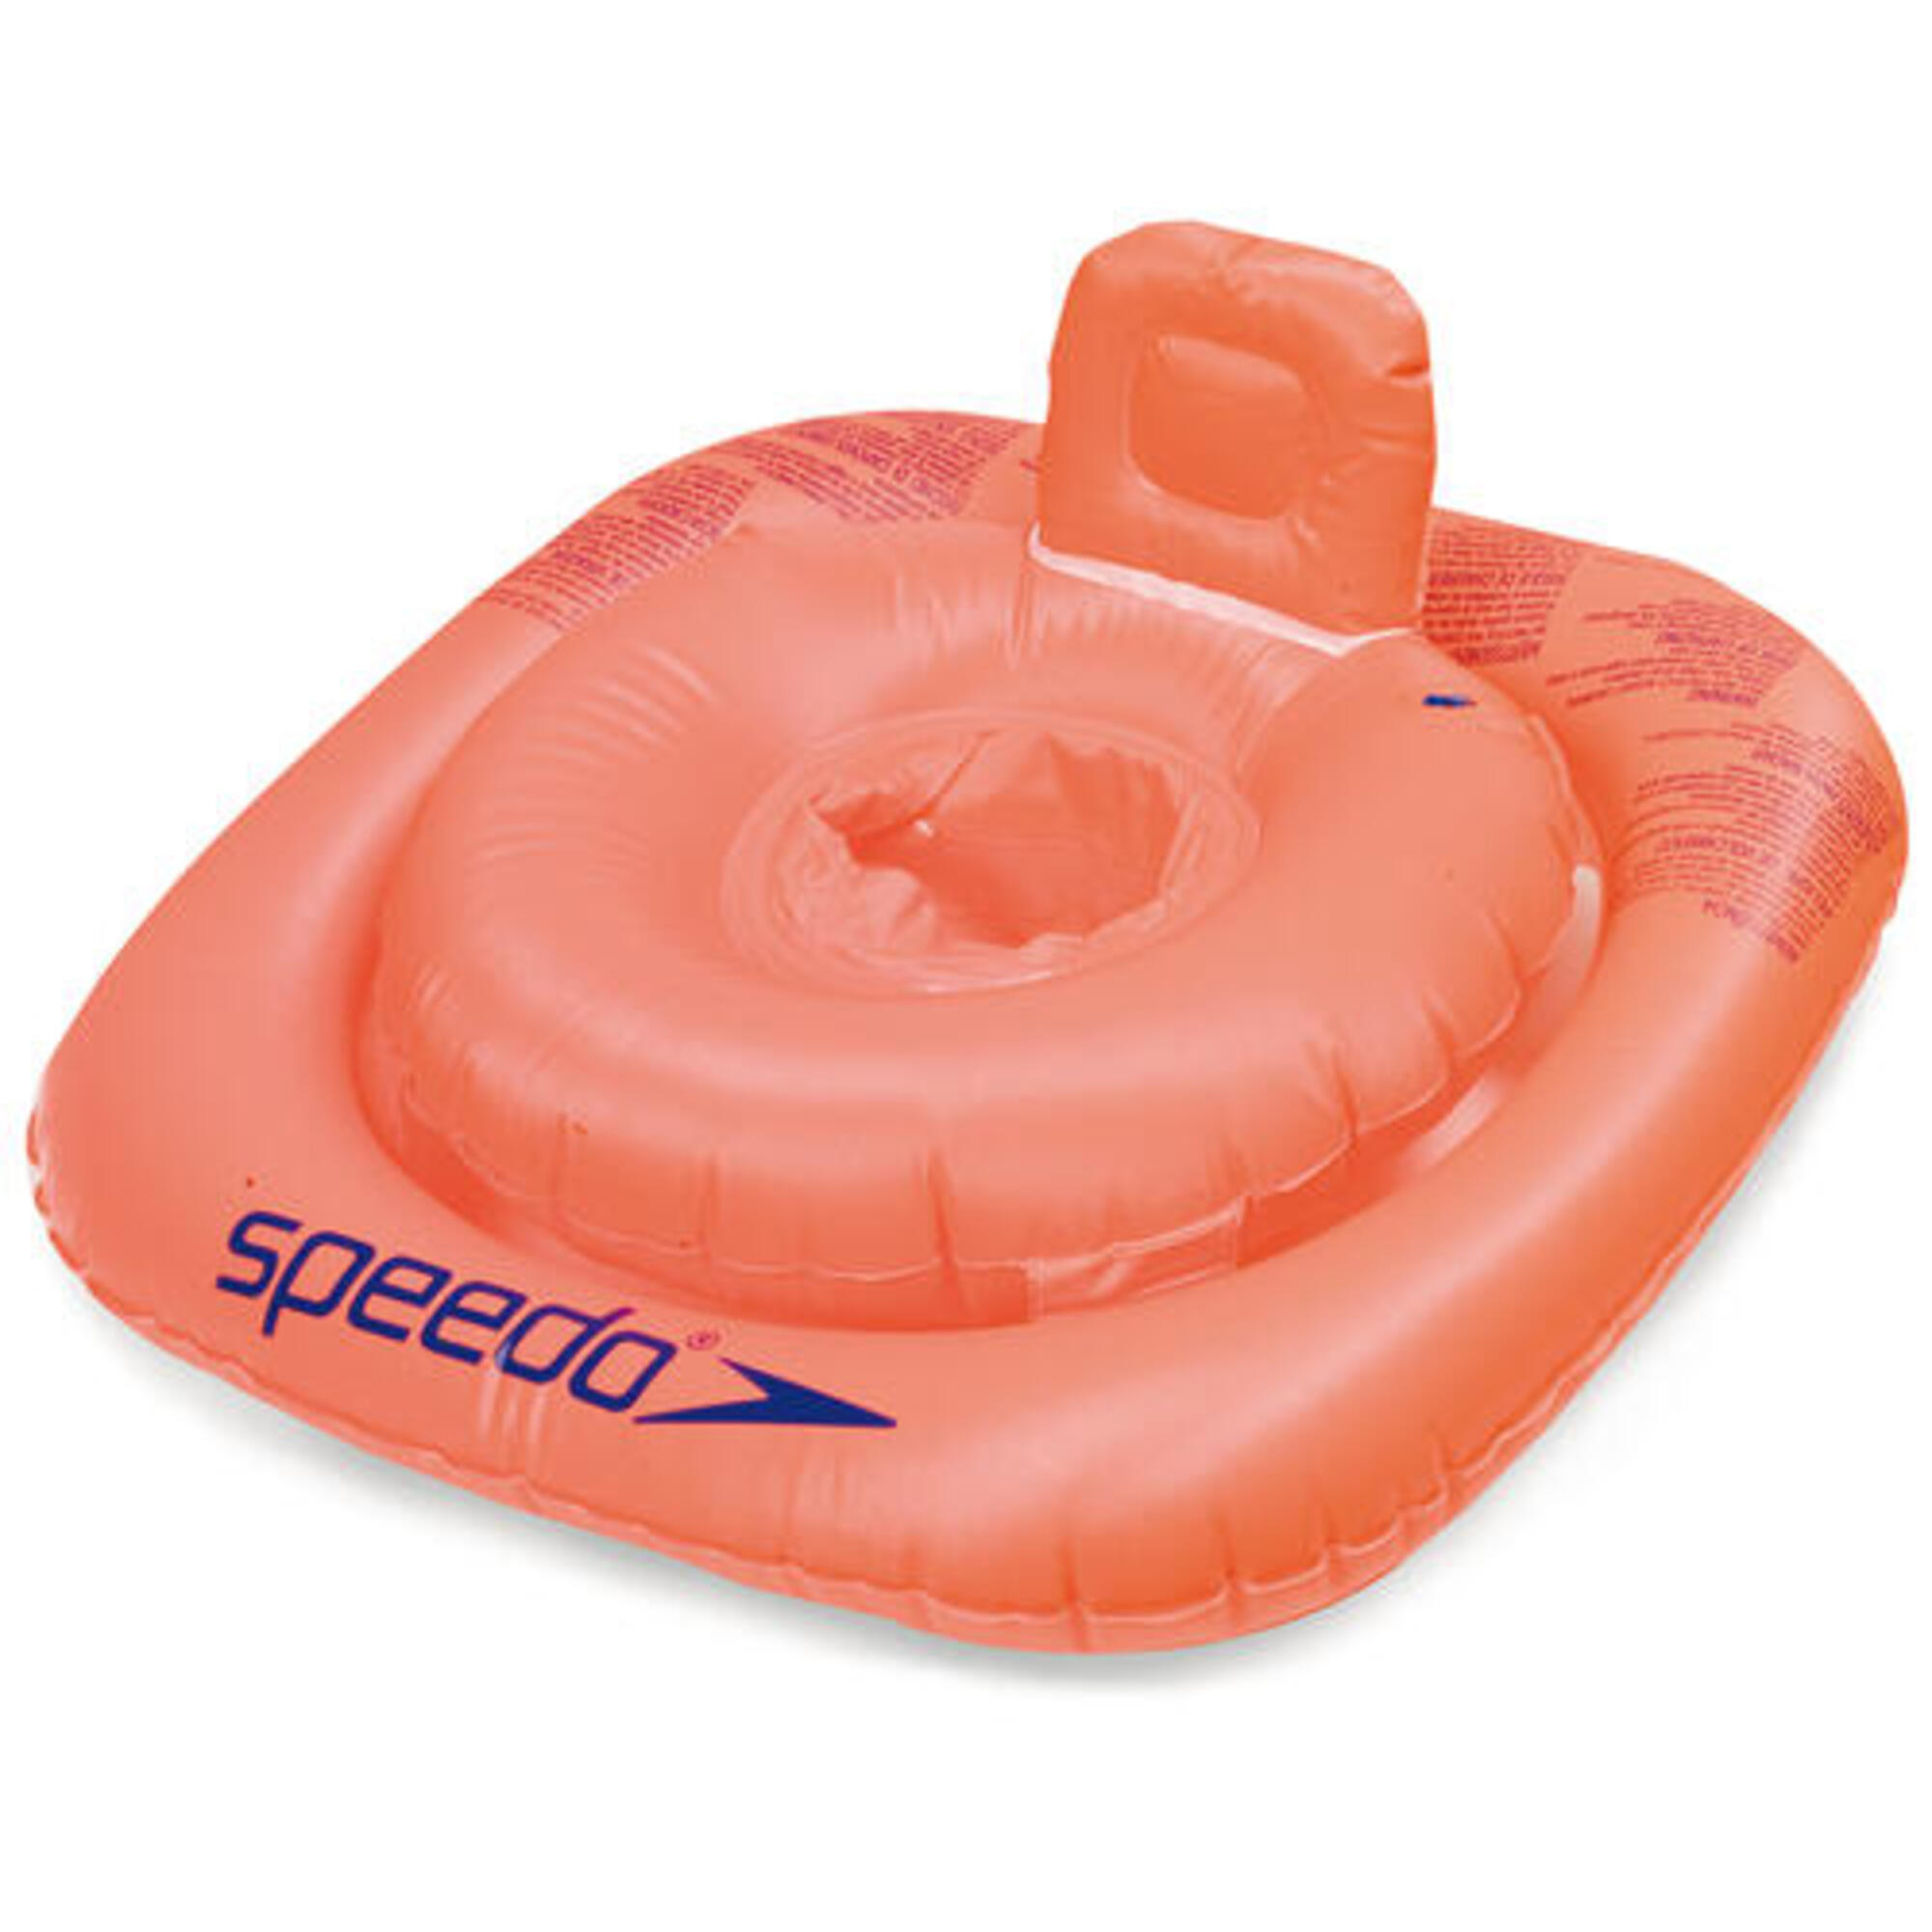 Intex baby float Swim Seat Support Pool Inflatable Aid Ring 6-12 Months 